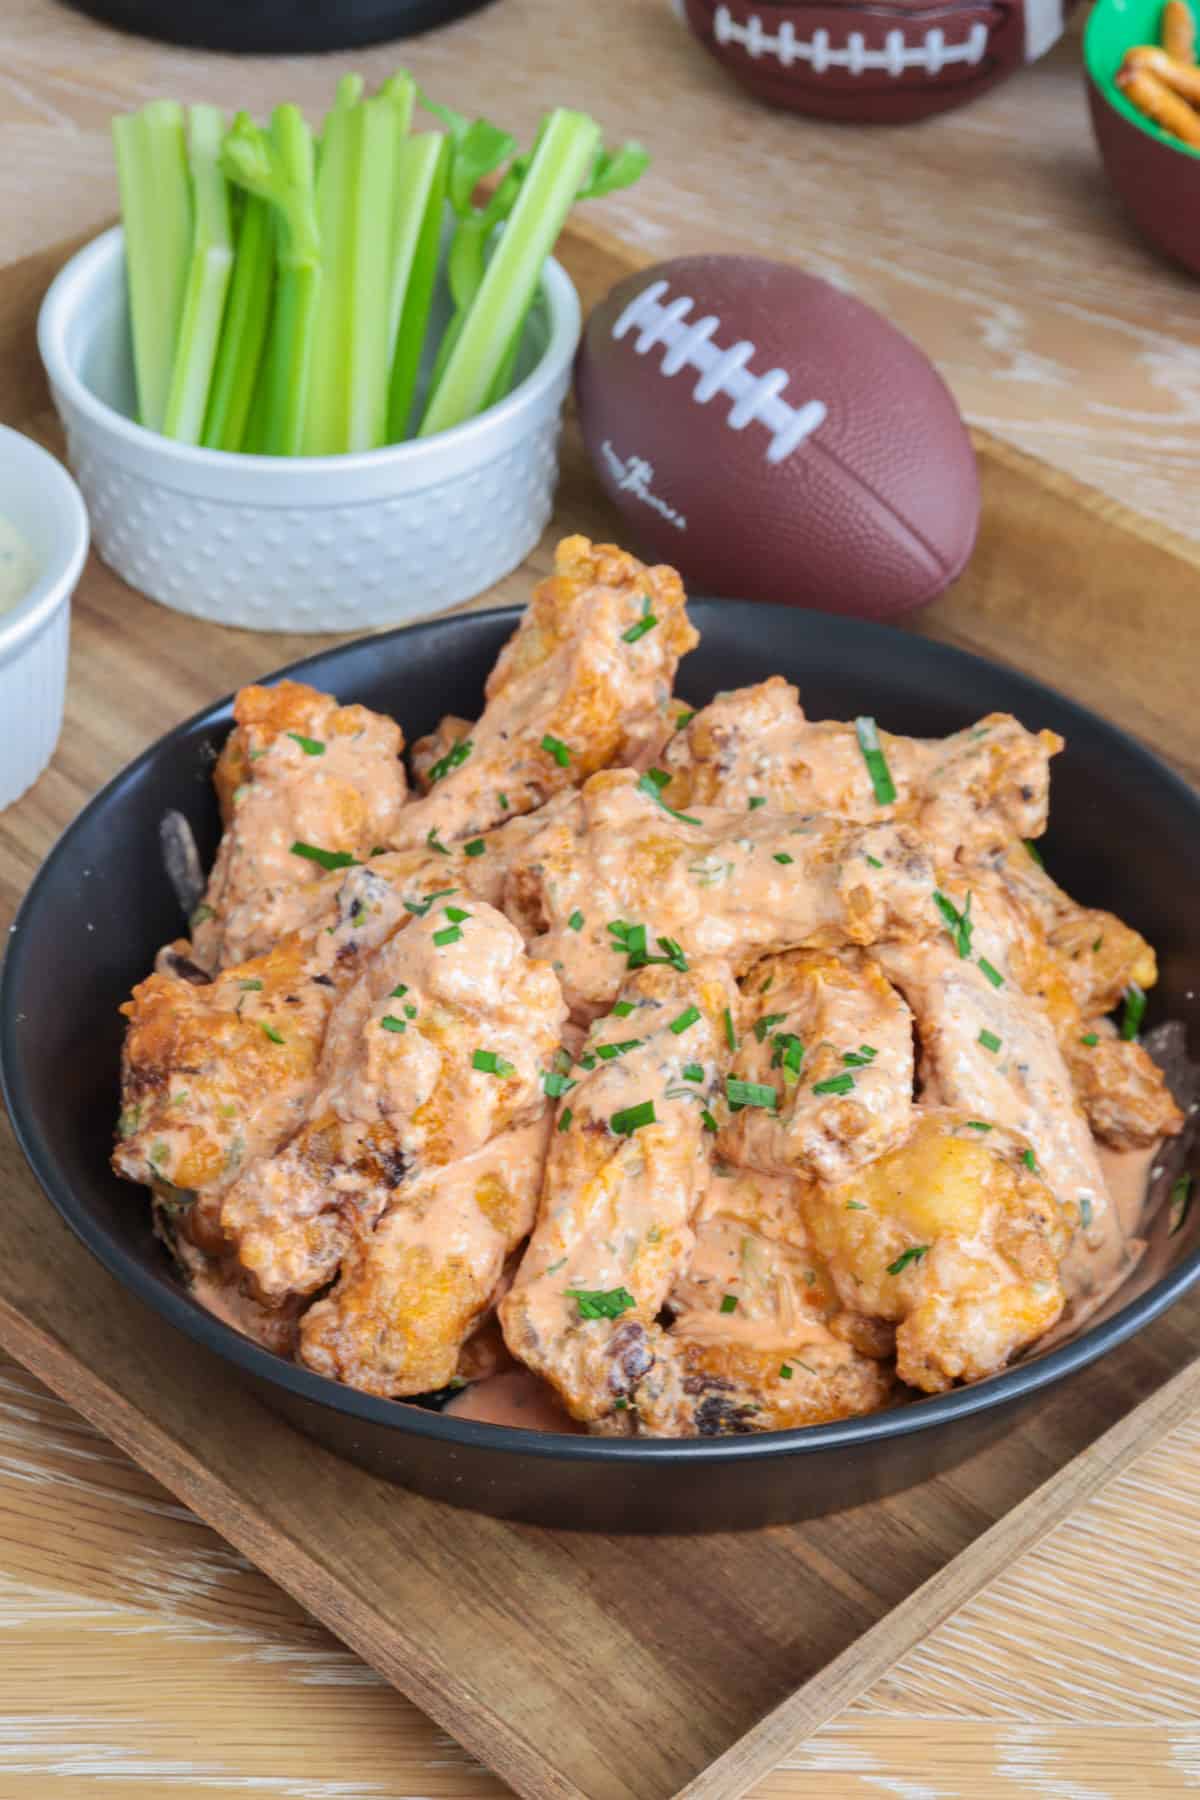 Crispy chicken wings with buffalo ranch sauce in a bowl with football and celery sticks.